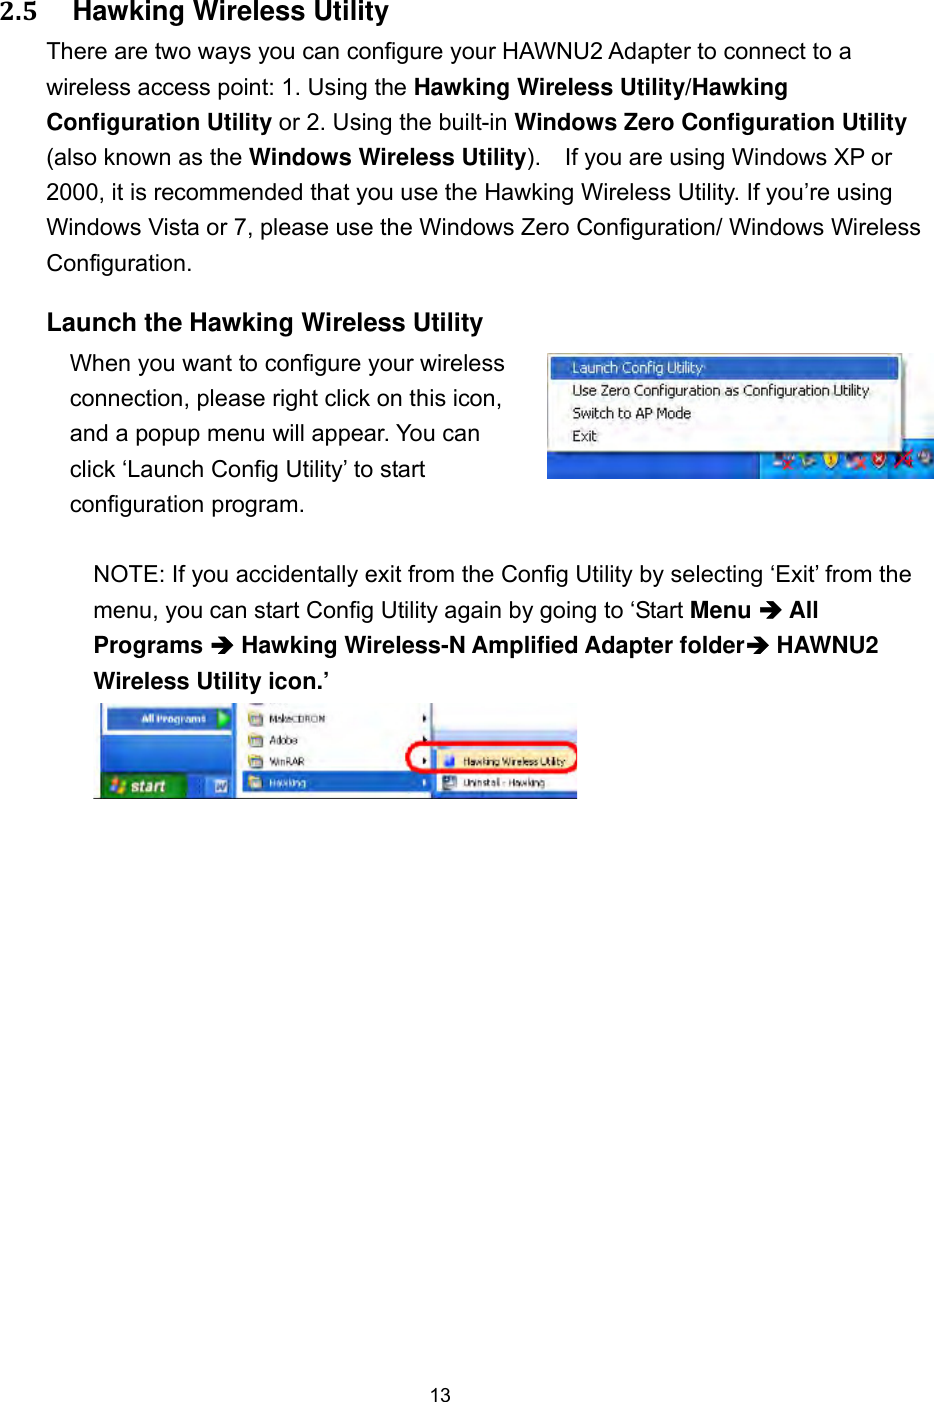  13 2.5   Hawking Wireless Utility There are two ways you can configure your HAWNU2 Adapter to connect to a wireless access point: 1. Using the Hawking Wireless Utility/Hawking Configuration Utility or 2. Using the built-in Windows Zero Configuration Utility (also known as the Windows Wireless Utility).    If you are using Windows XP or 2000, it is recommended that you use the Hawking Wireless Utility. If you’re using Windows Vista or 7, please use the Windows Zero Configuration/ Windows Wireless Configuration.  Launch the Hawking Wireless Utility When you want to configure your wireless connection, please right click on this icon, and a popup menu will appear. You can click ‘Launch Config Utility’ to start configuration program.  NOTE: If you accidentally exit from the Config Utility by selecting ‘Exit’ from the menu, you can start Config Utility again by going to ‘Start Menu  All Programs  Hawking Wireless-N Amplified Adapter folder HAWNU2 Wireless Utility icon.’      